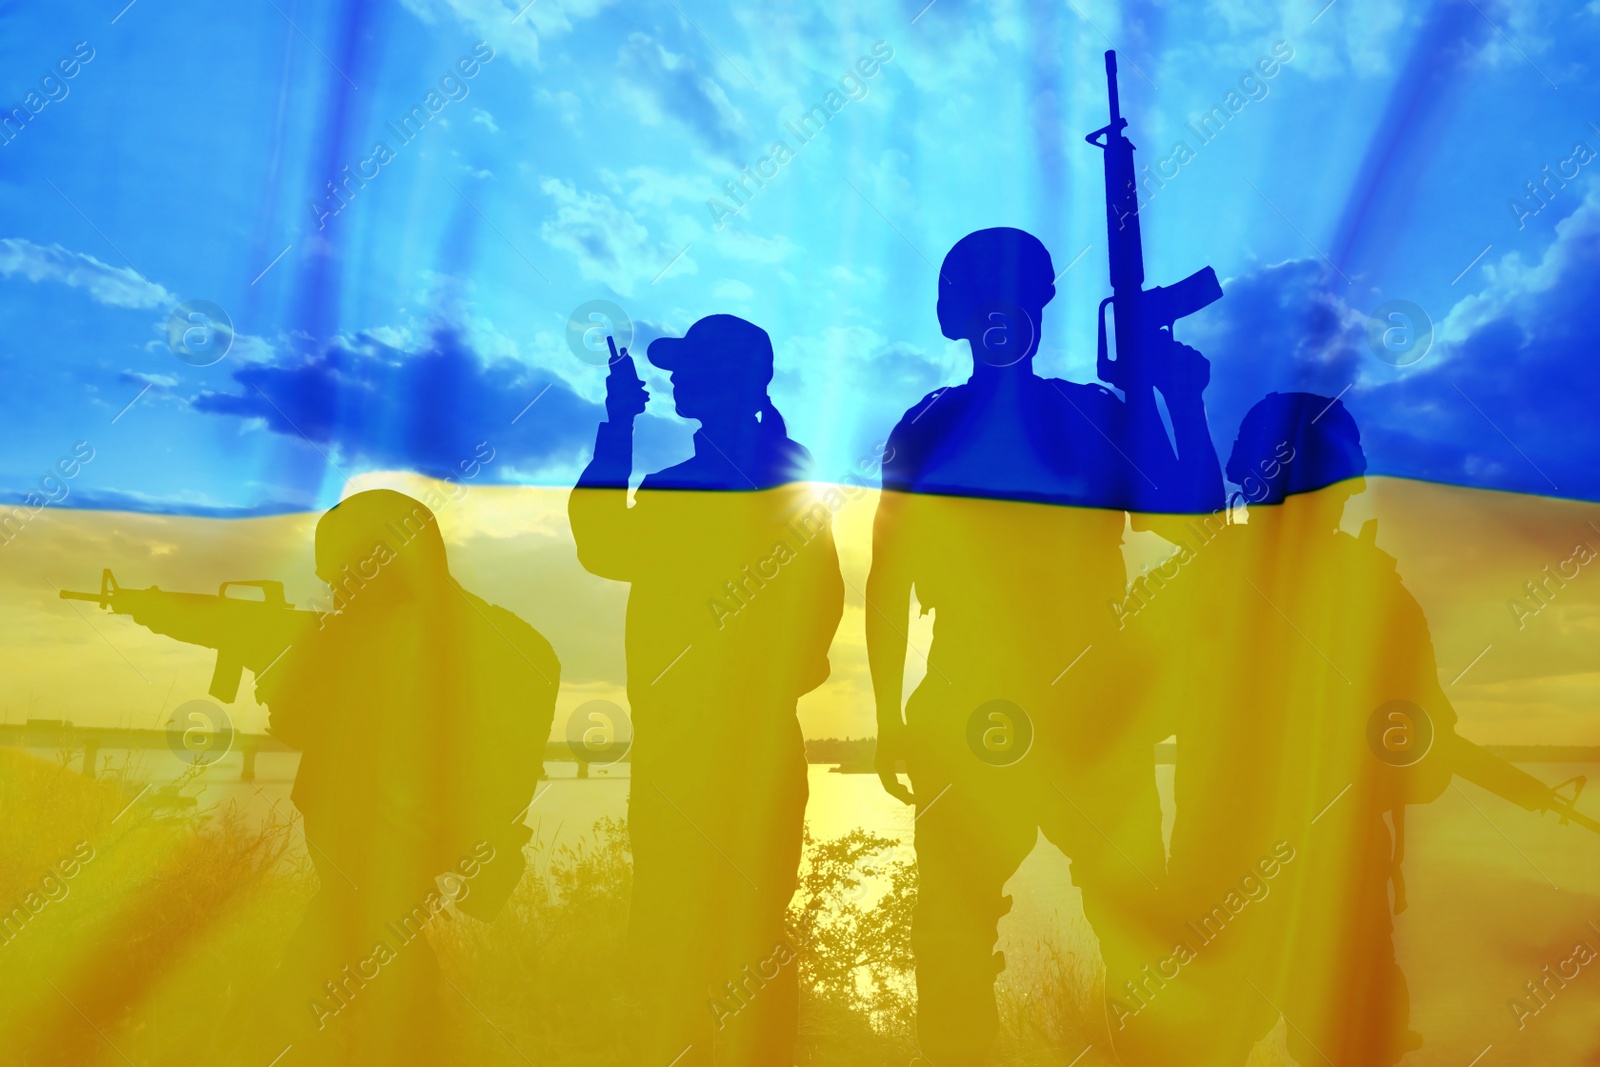 Image of Silhouettes of soldiers and Ukrainian national flag, double exposure